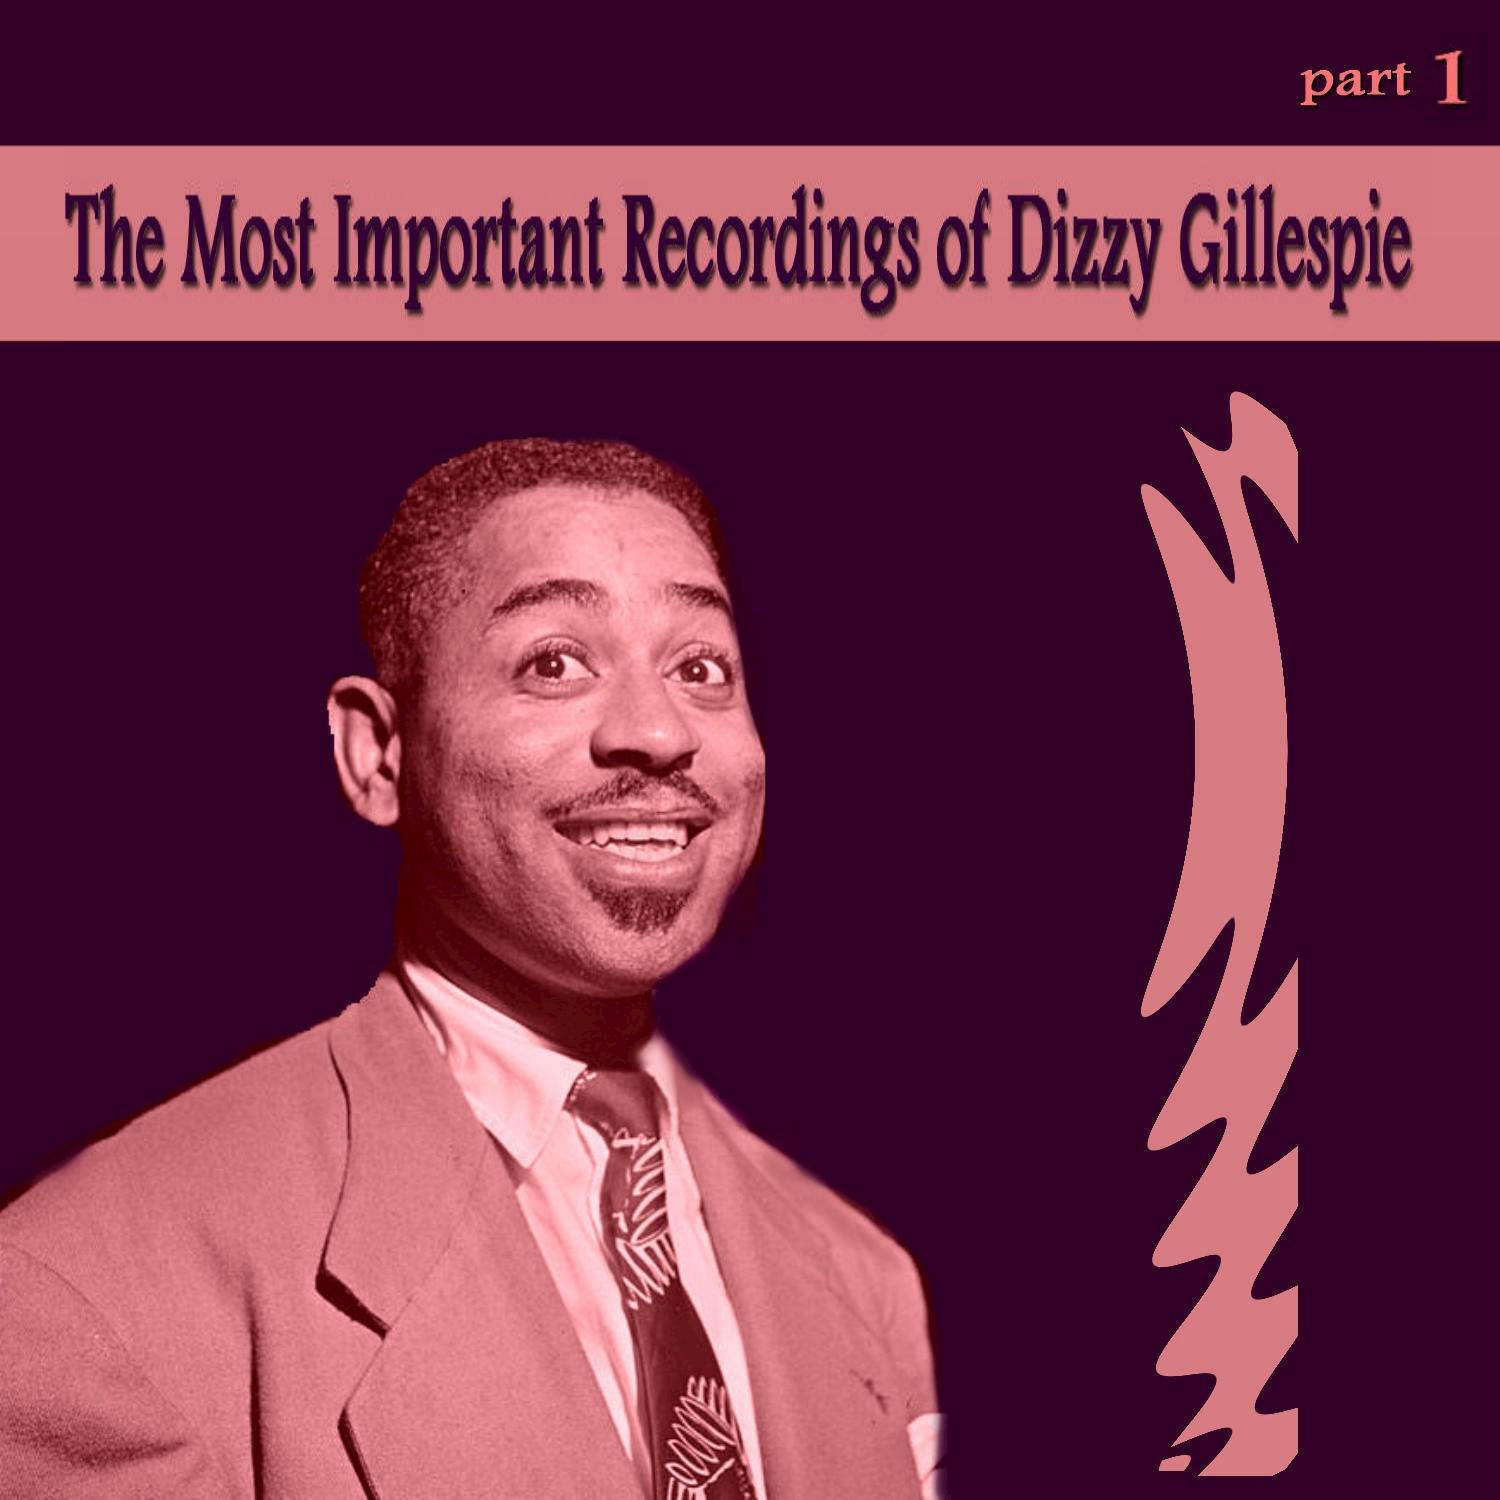 The Most Important Recordings of Dizzy Gillespie, Pt. 1